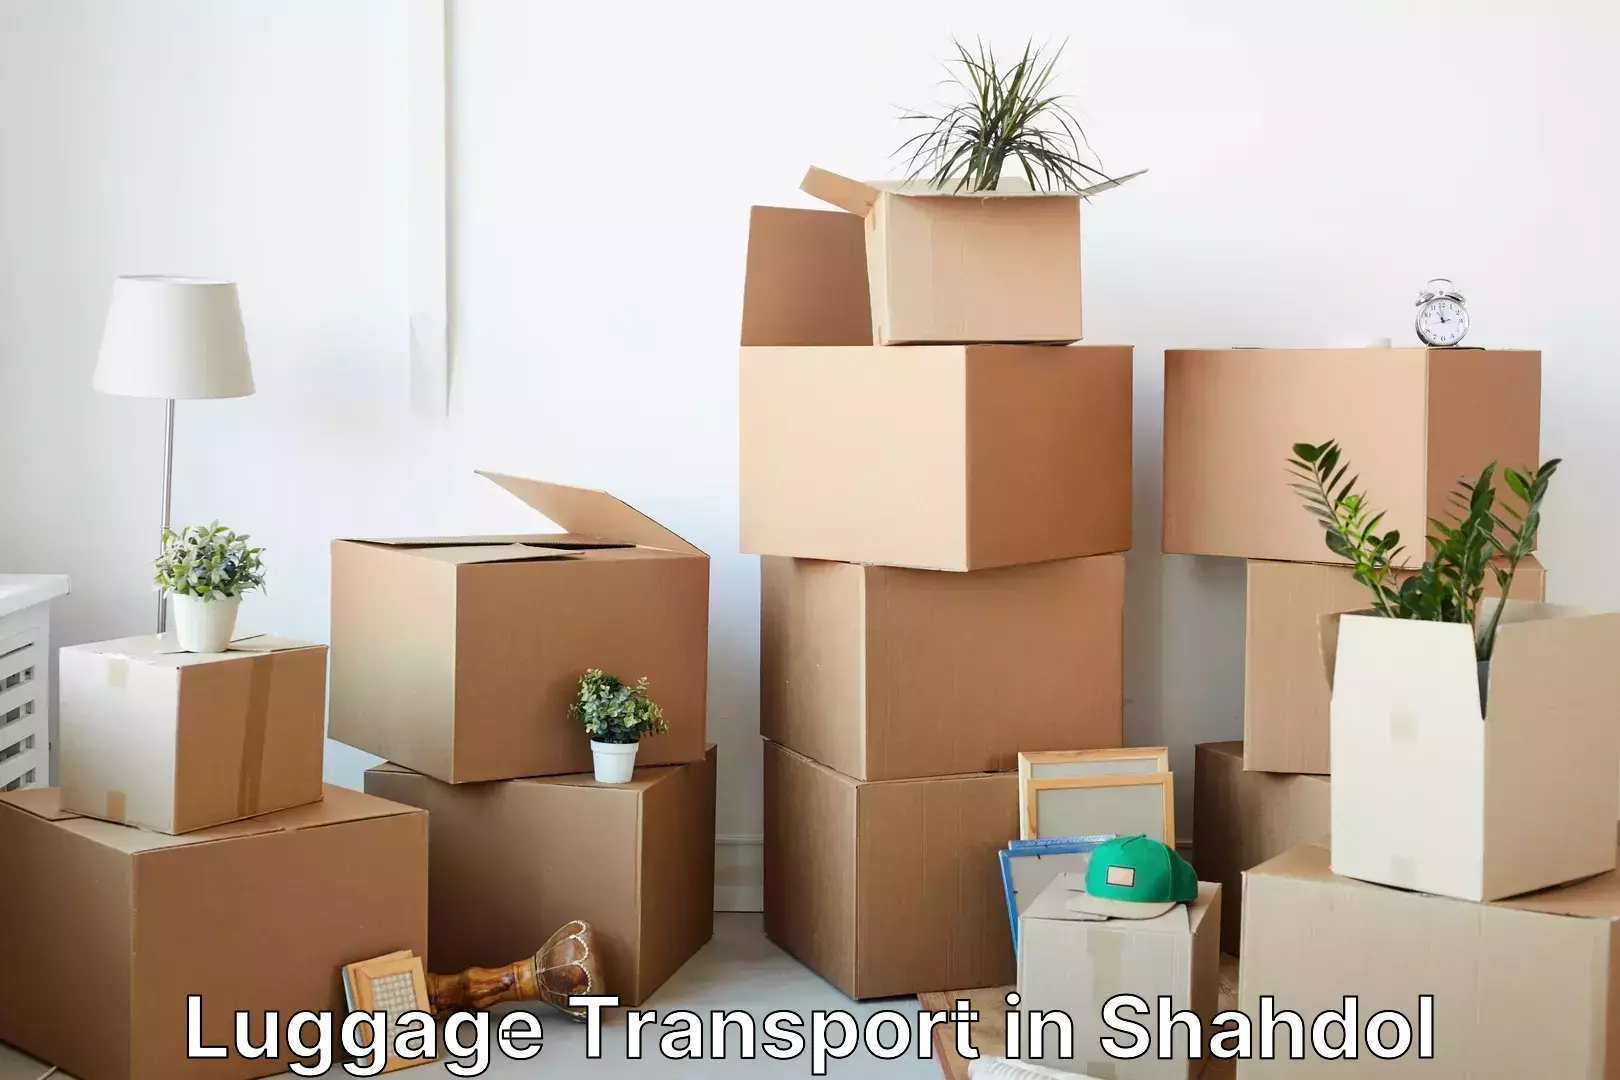 Baggage handling services in Shahdol